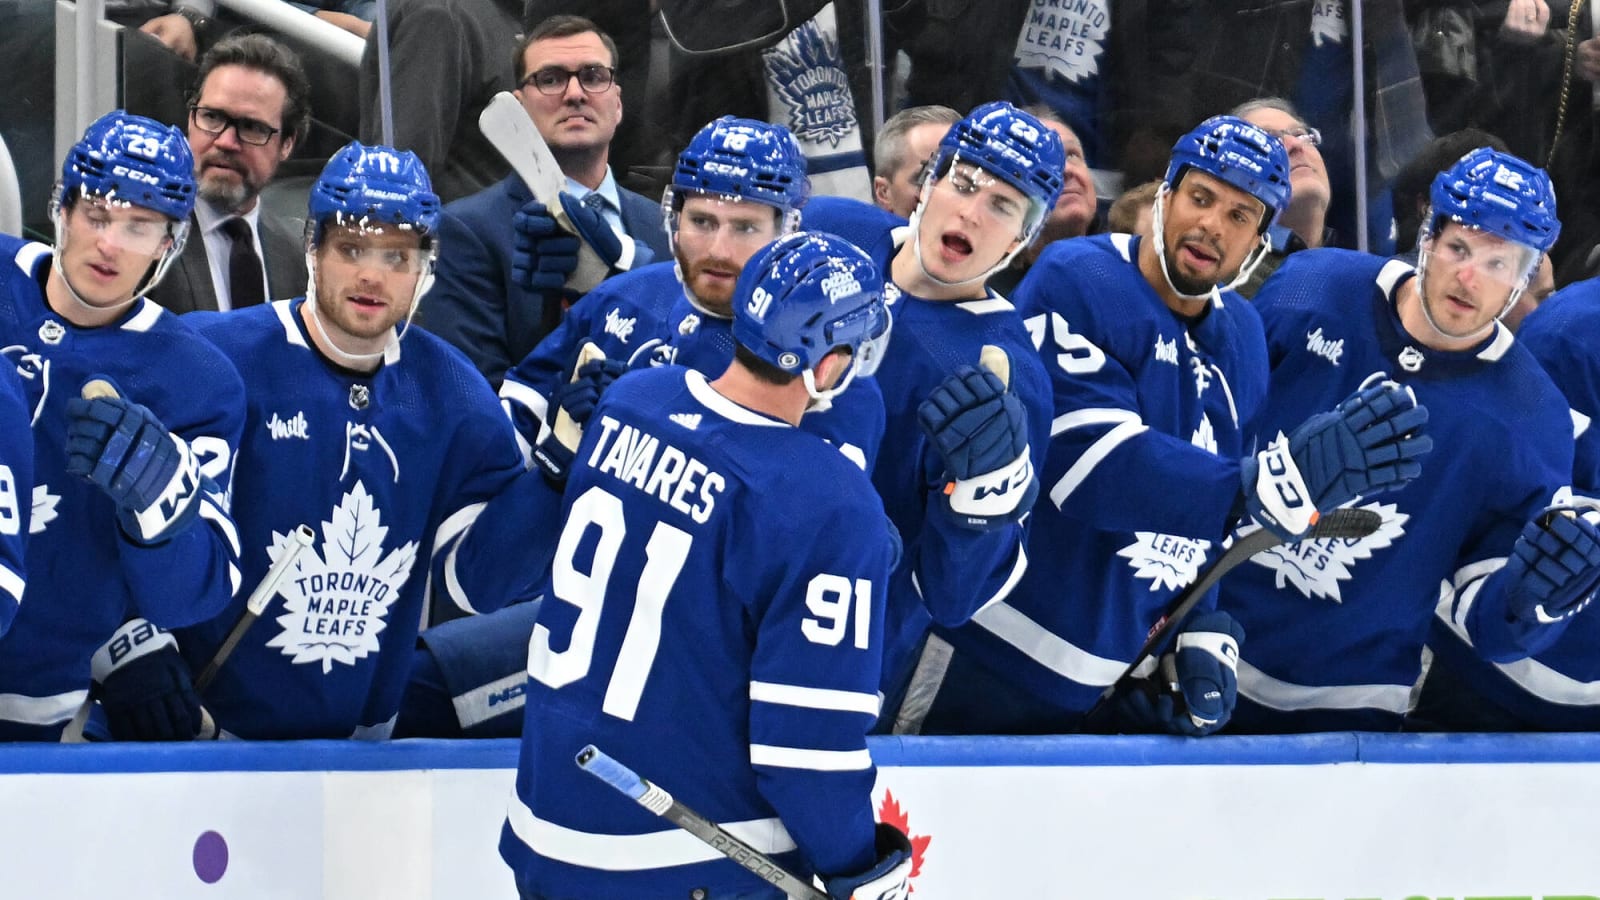 Assessing how much 'DAWG' the Maple Leafs have in them